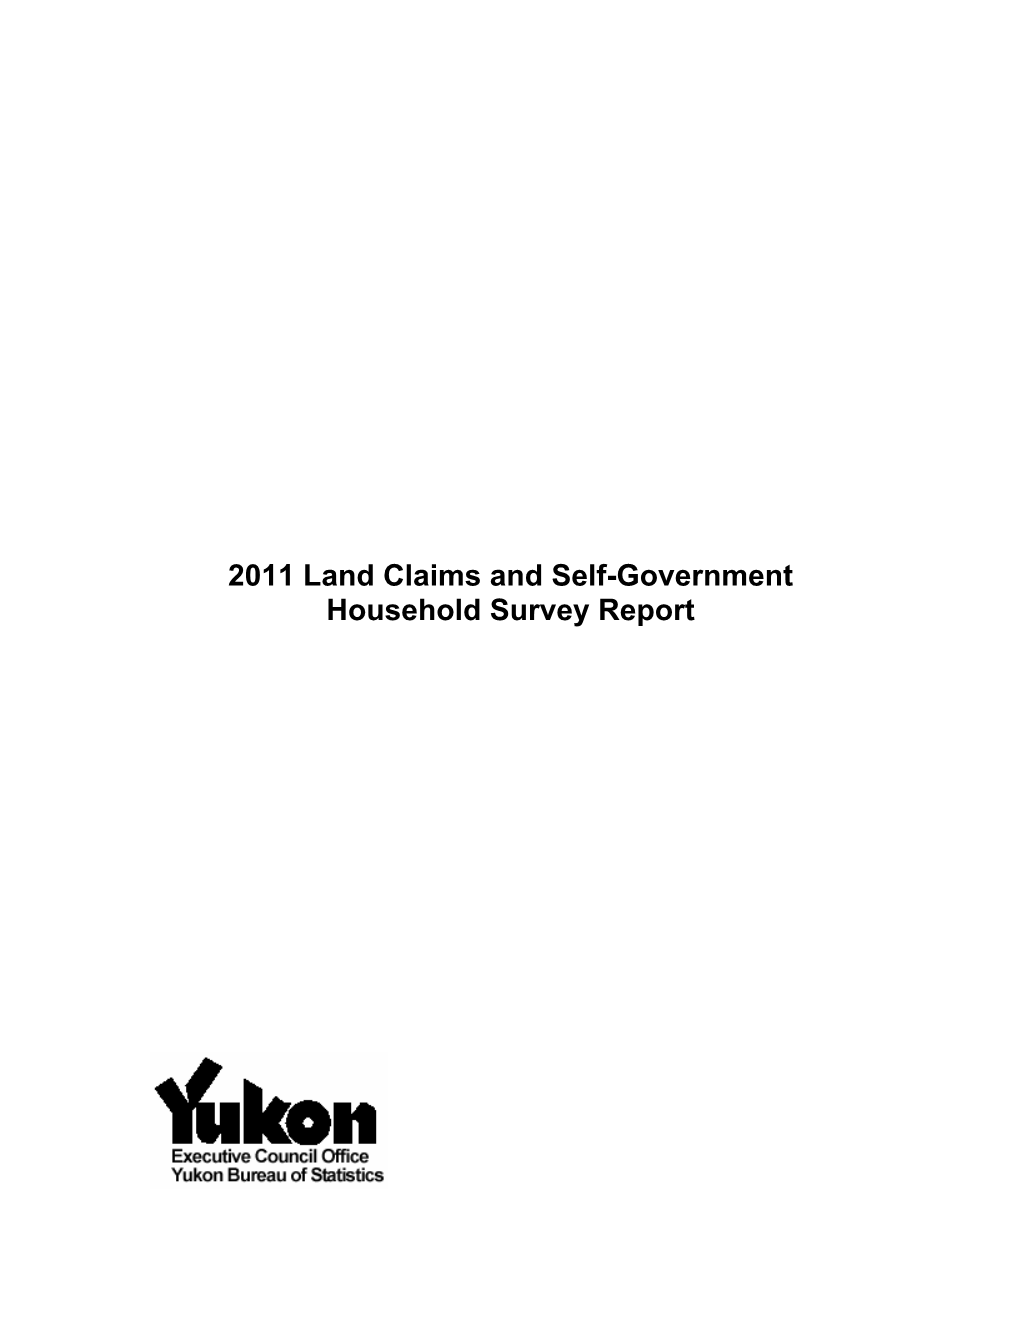 2011 Land Claims and Self-Government Household Survey Report